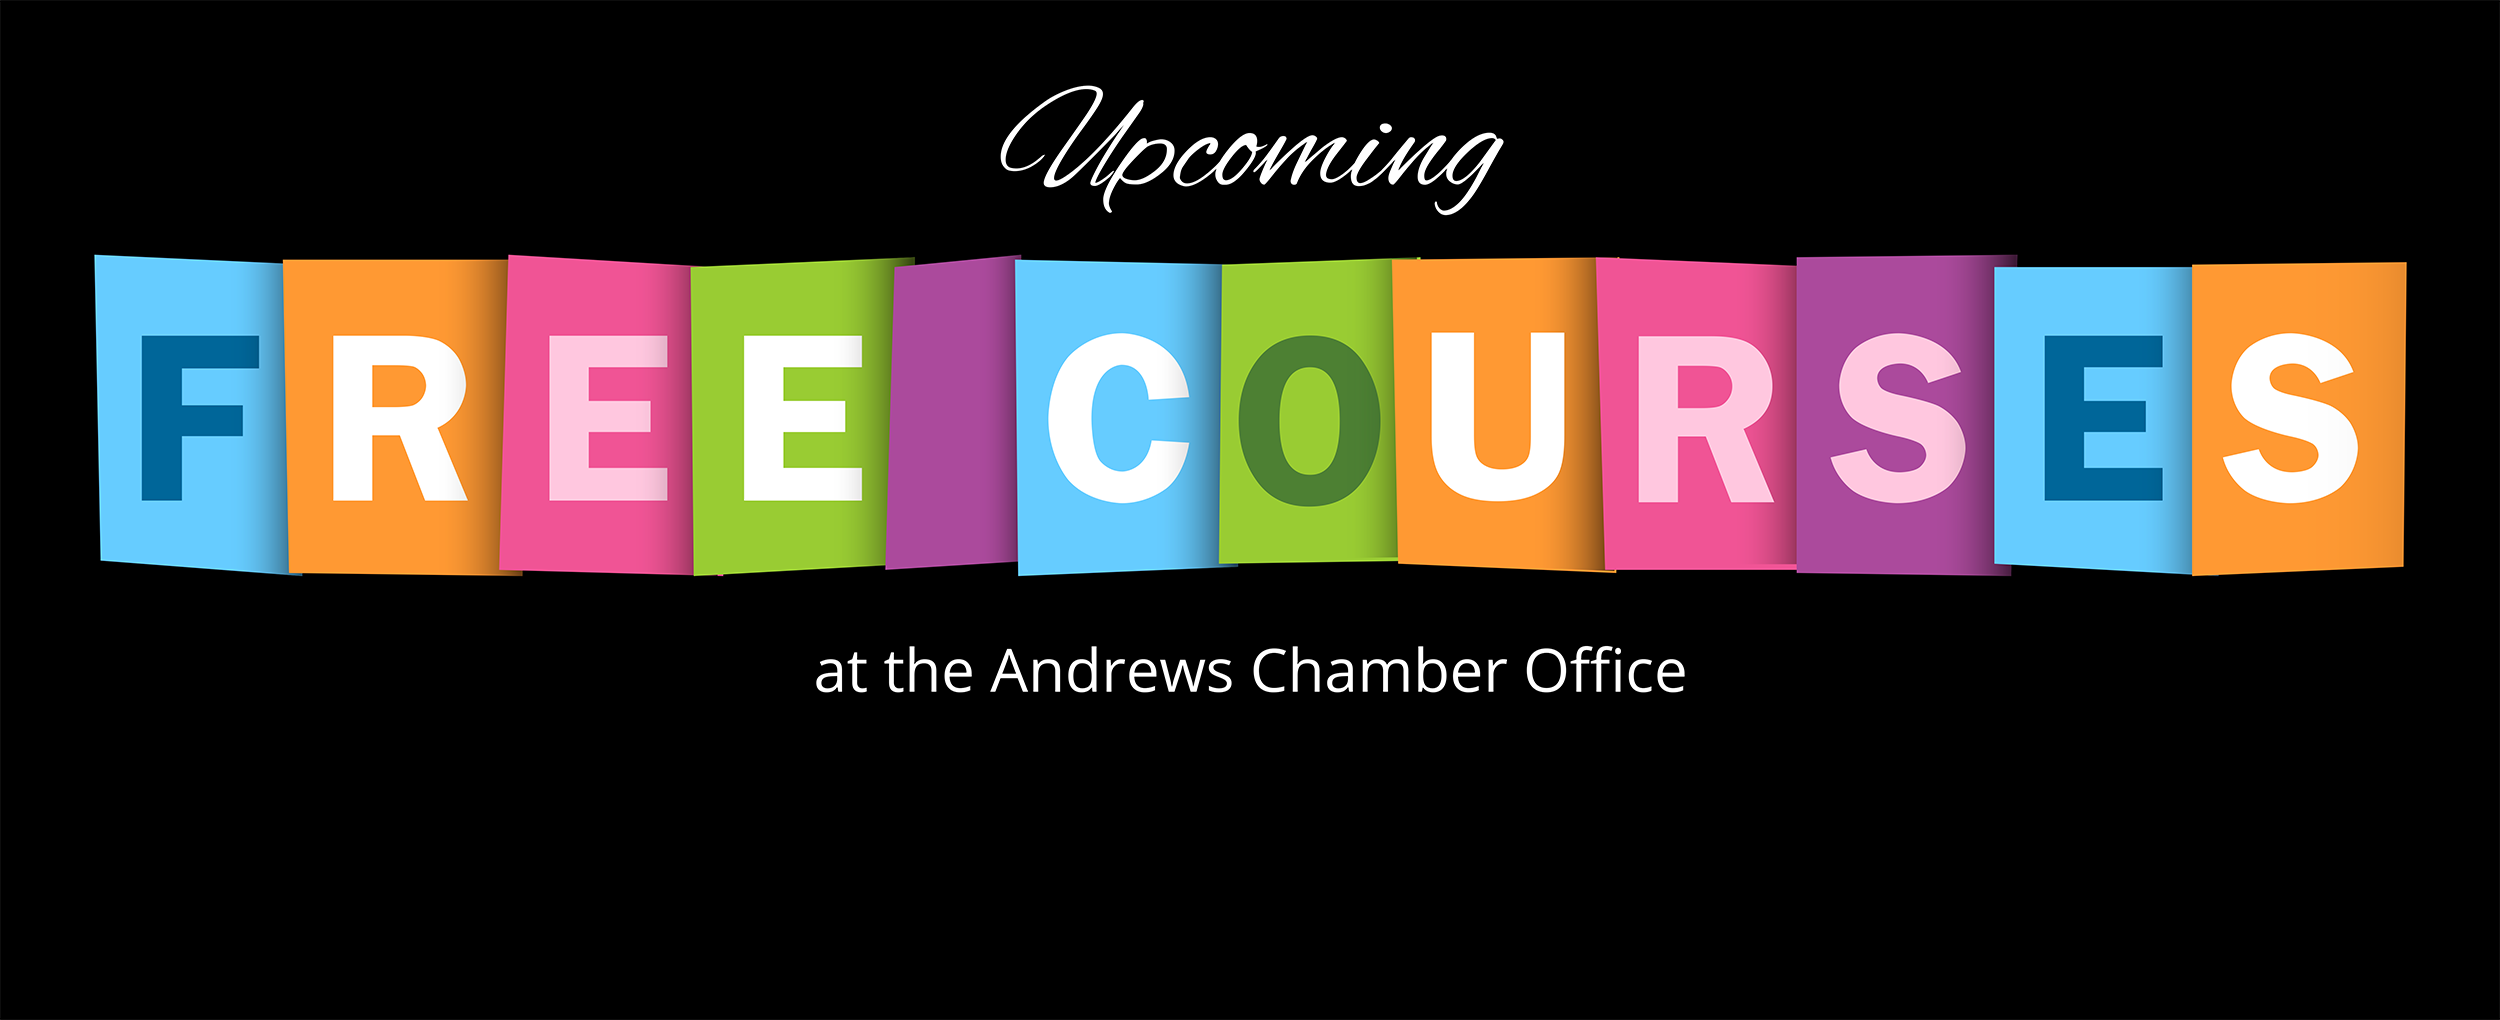 Upcoming Free Courses at the Andrews Chamber Office